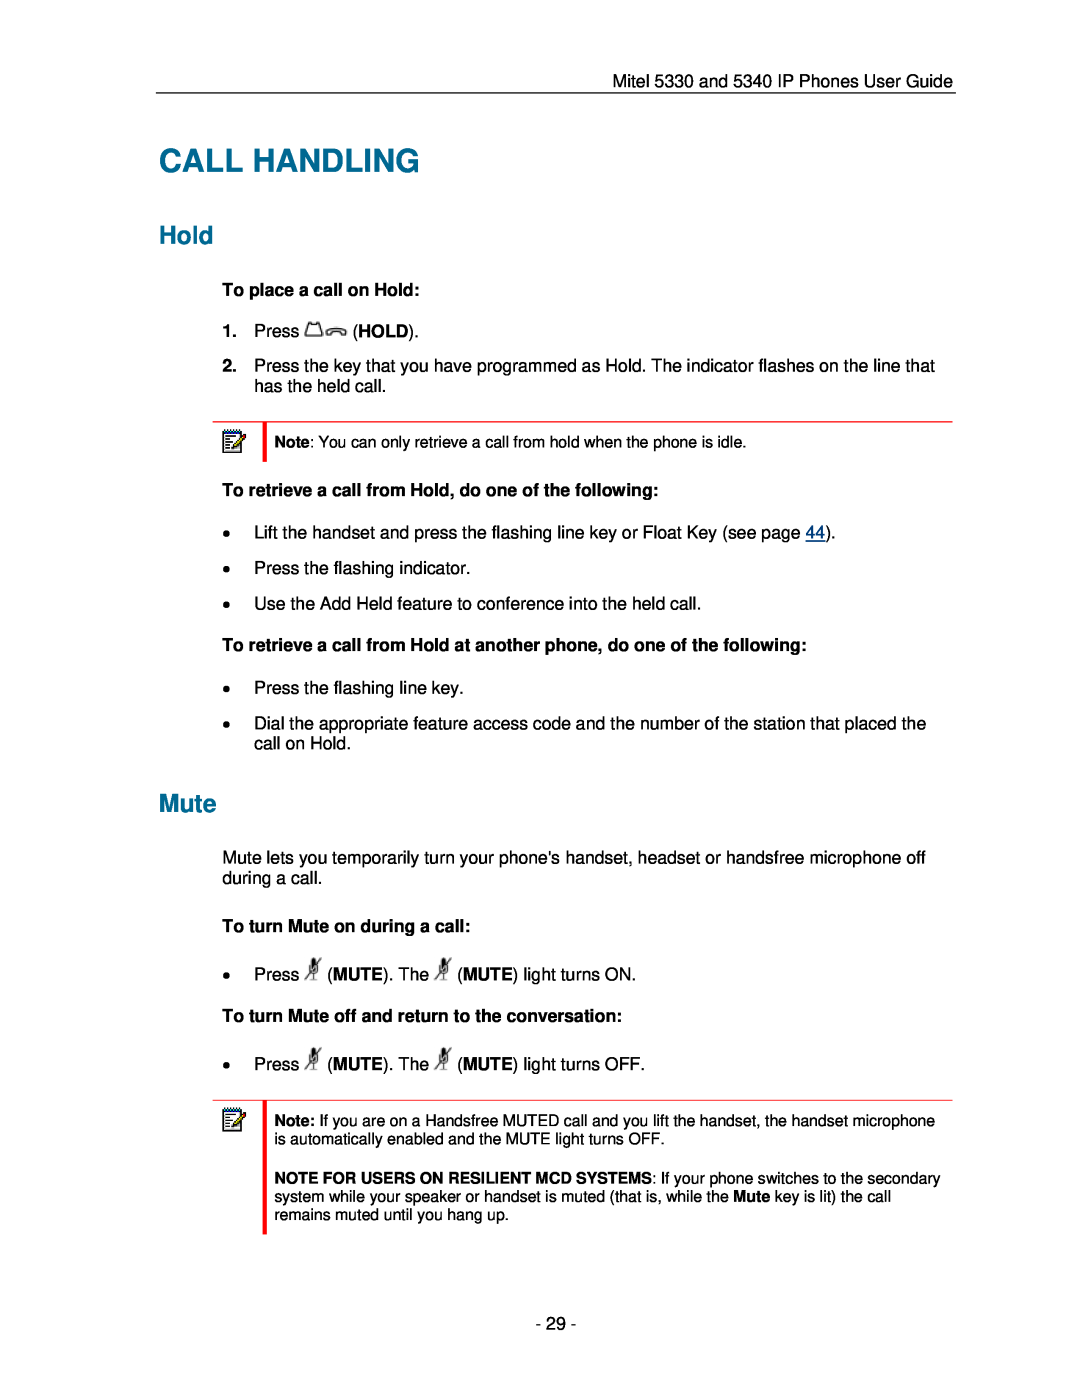 Mitel 5330 manual Call Handling, To place a call on Hold, To turn Mute on during a call 